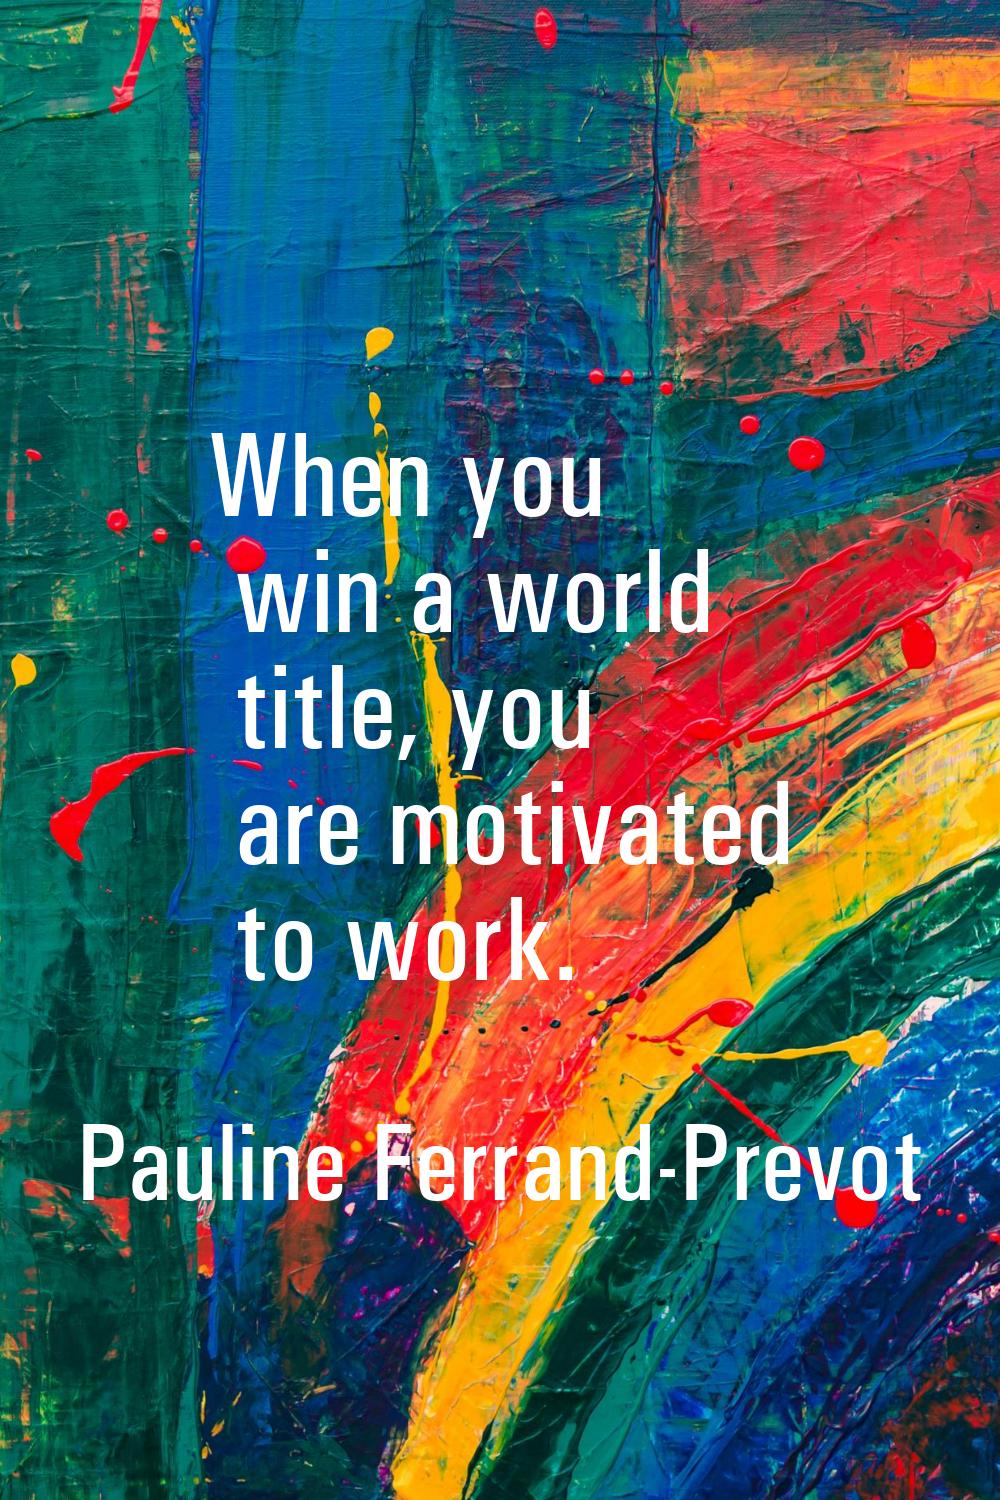 When you win a world title, you are motivated to work.